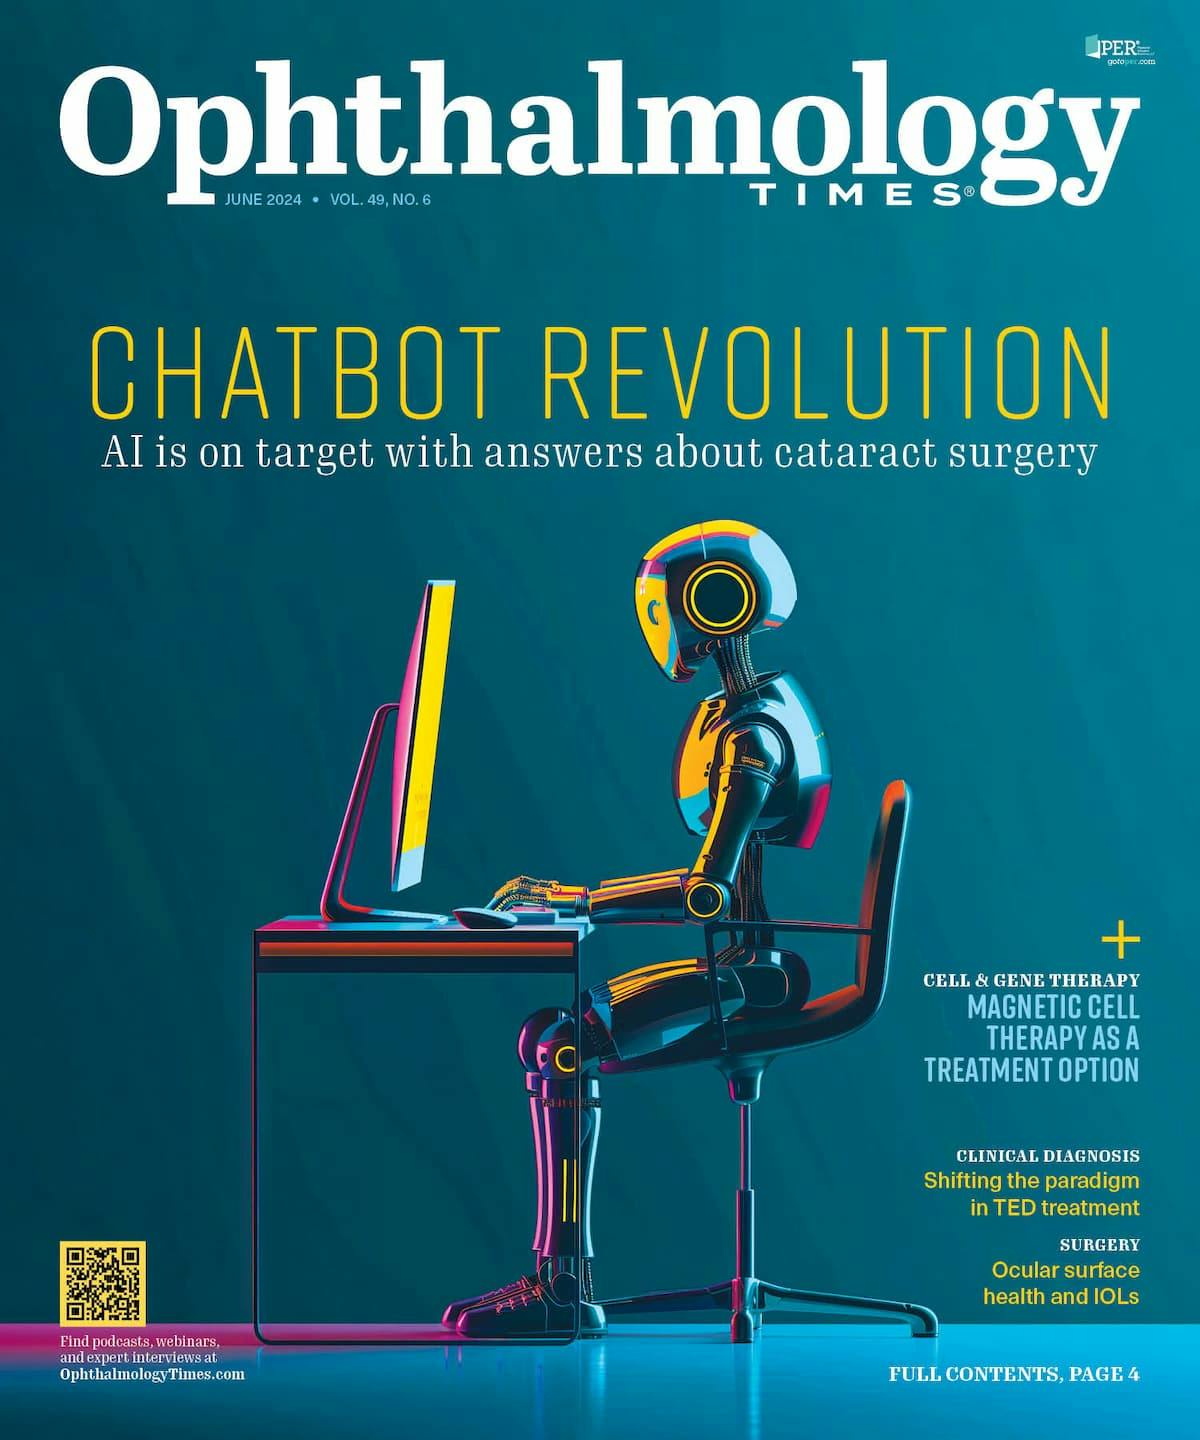 Ophthalmology Times: June 2024